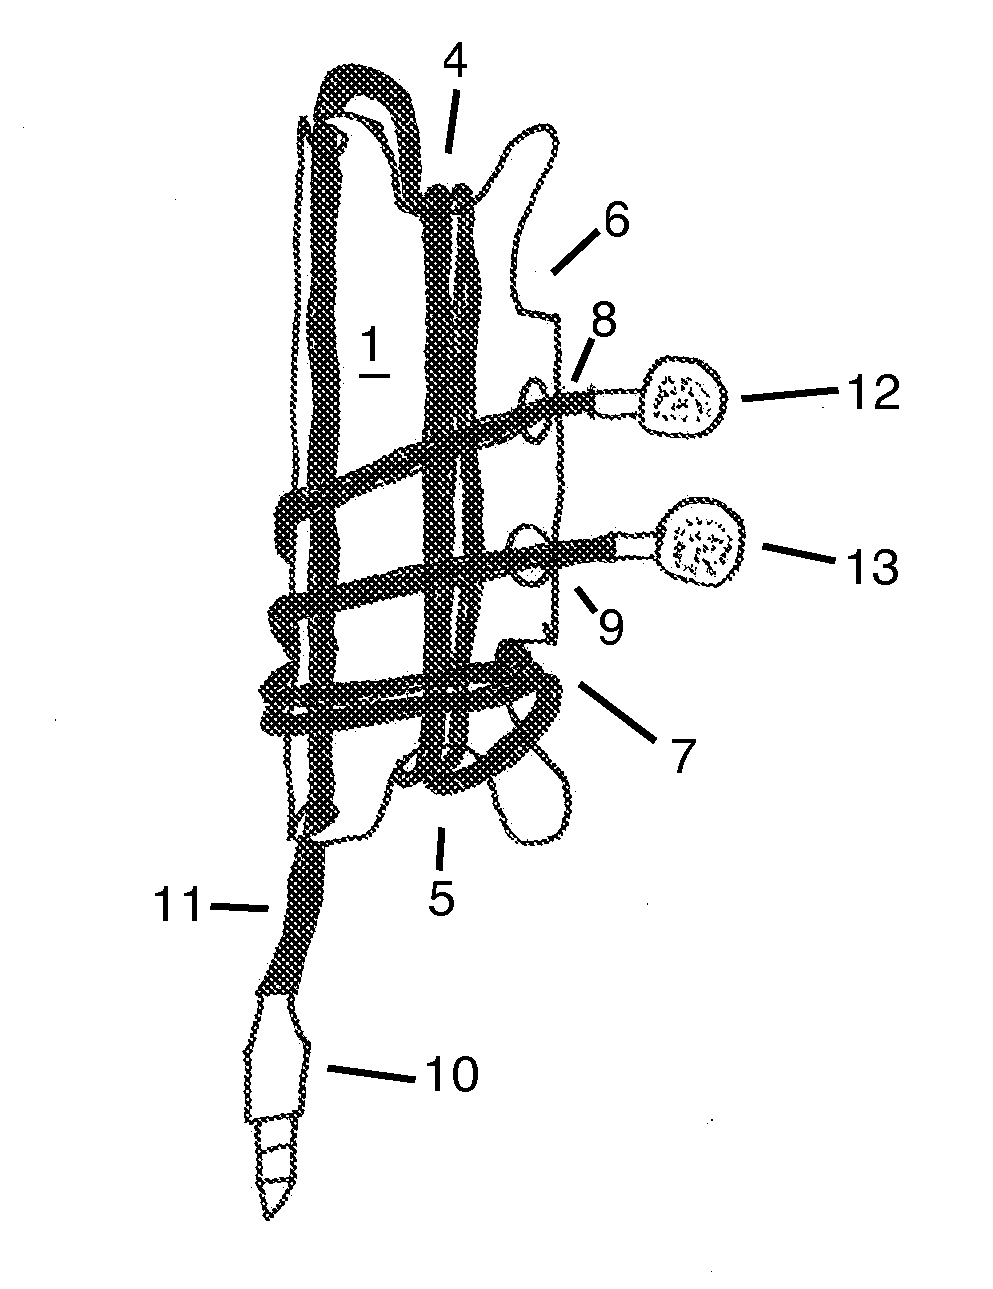 Apparatus for Managing Personal Electronic Accessory Cords